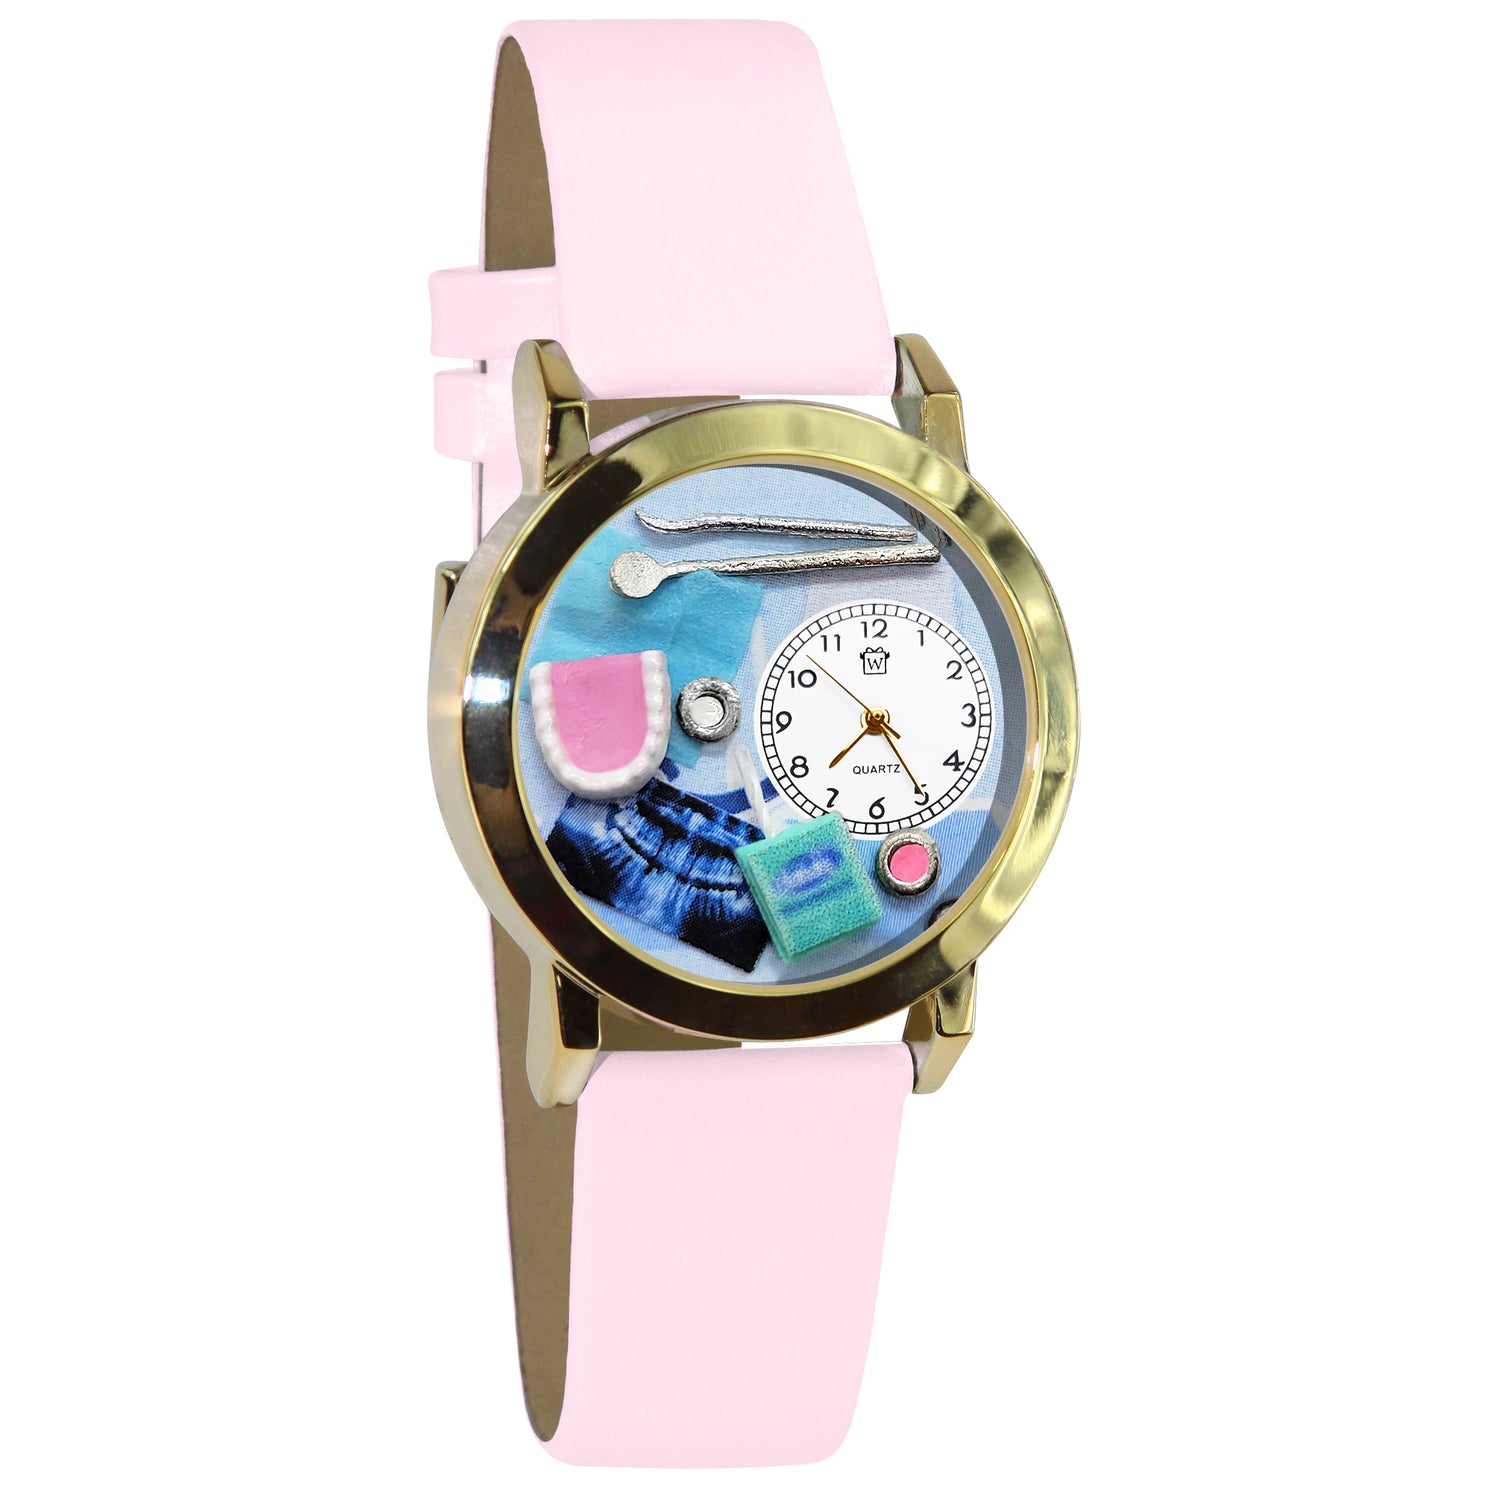 Whimsical Gifts | Dentist Dental Hygienist 3D Watch Small Style | Handmade in USA | Professions Themed | Dental Professions | Novelty Unique Fun Miniatures Gift | Gold Finish Pink Leather Watch Band